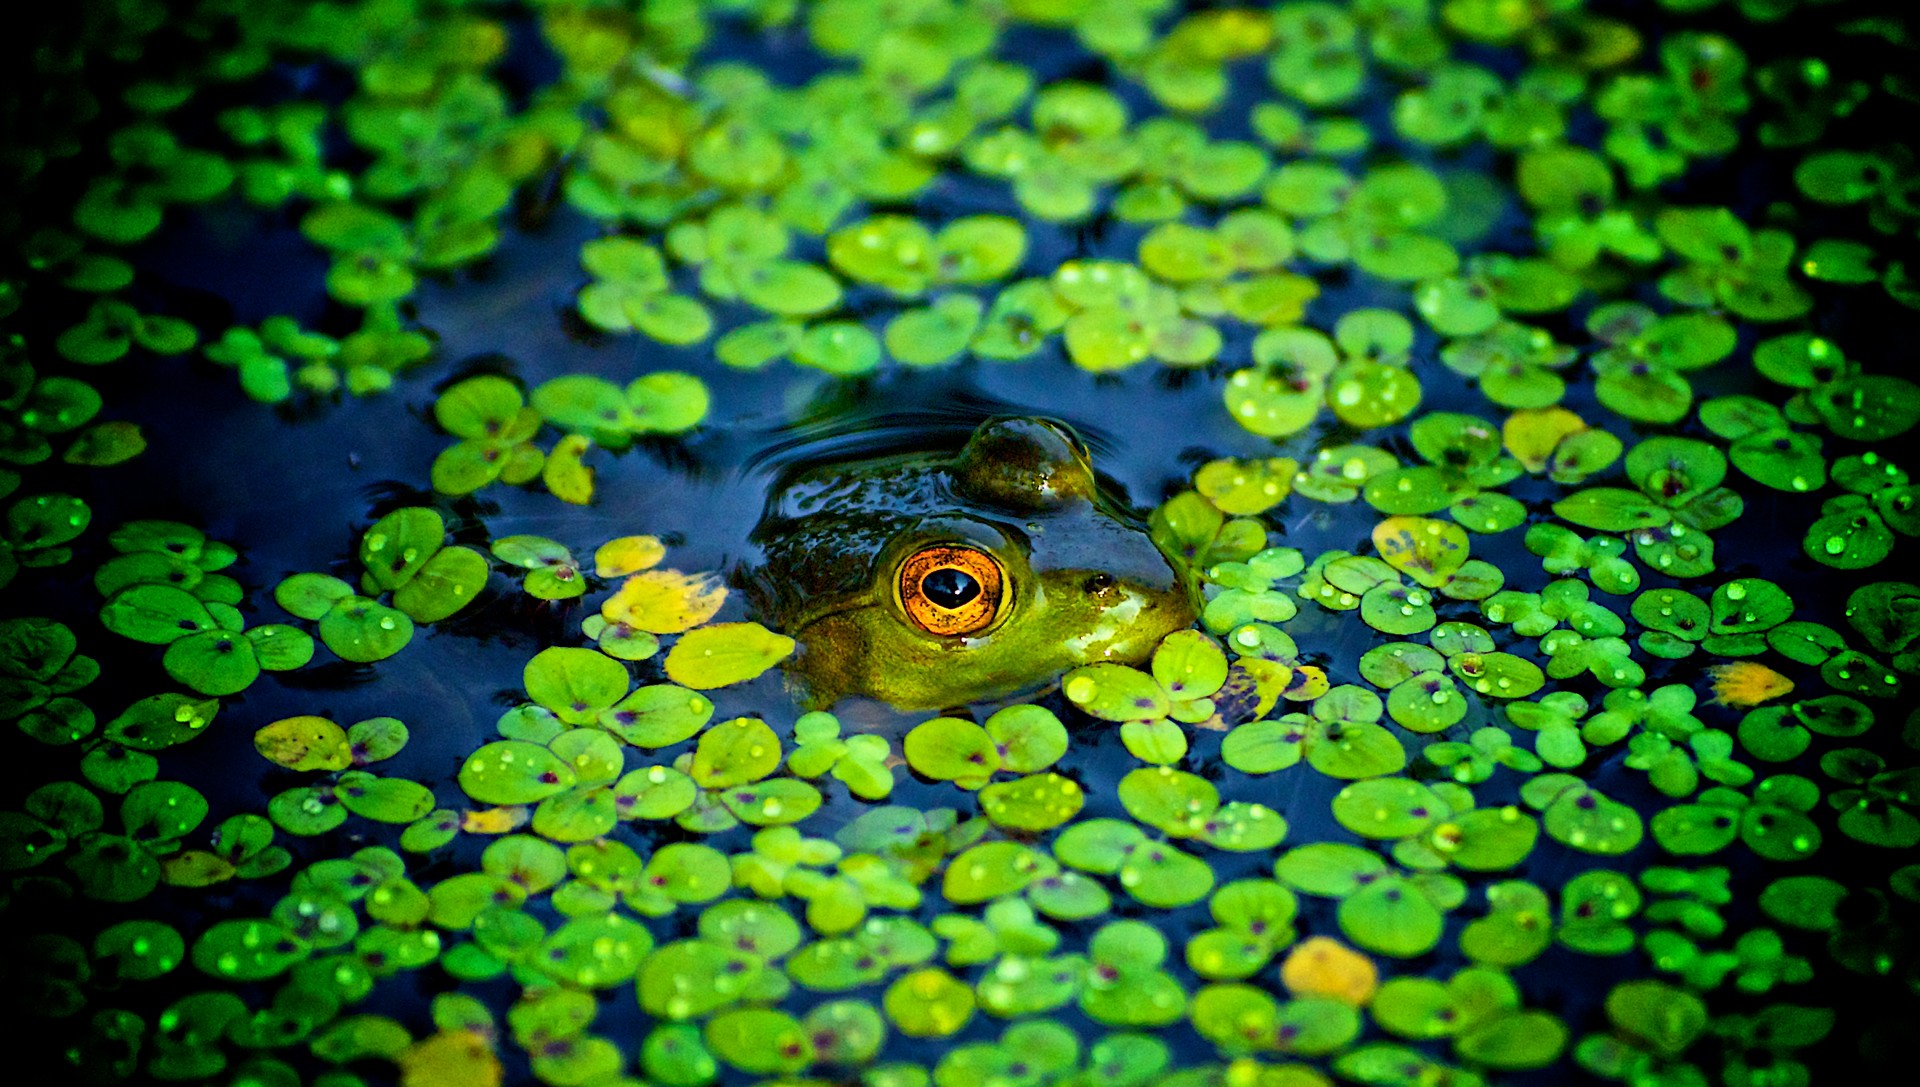 General 1920x1087 animals frog amphibian water plants leaves nature